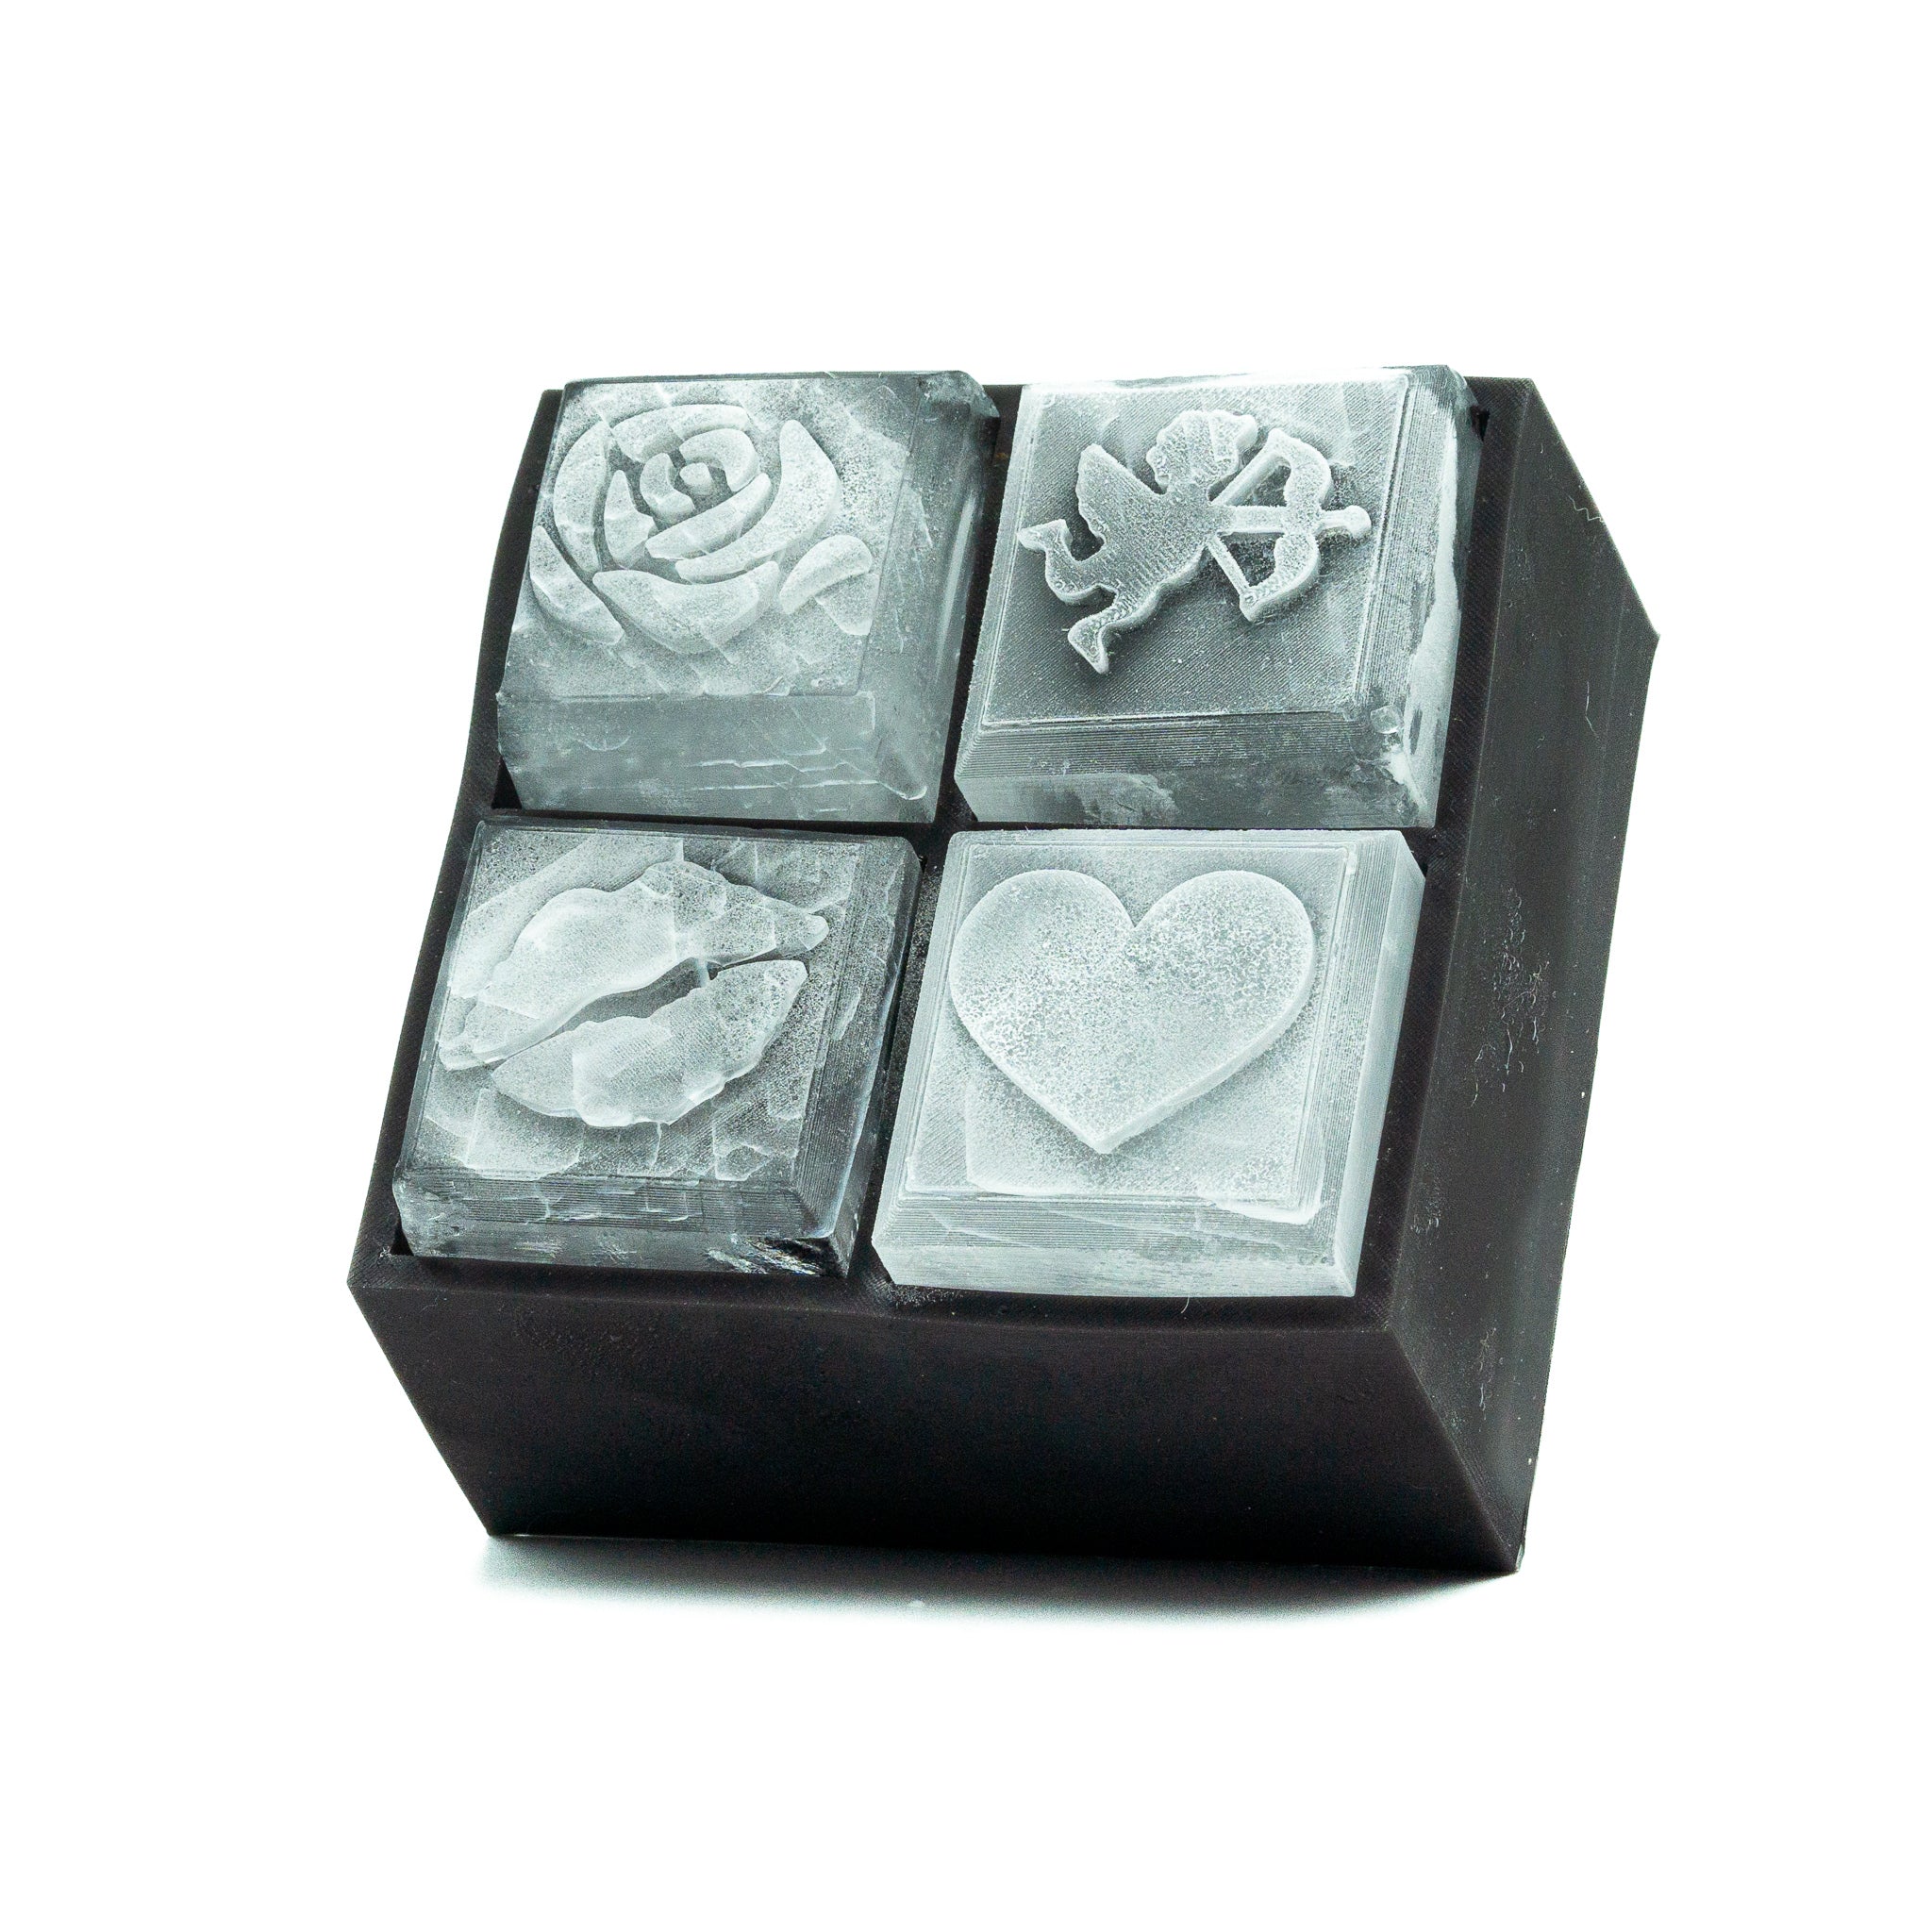 Dice Shape Ice Cube Tray, DND Dice Ice Cube Mold, Ice Cube Mold for  Dungeons and Dragons, Ice Cube Molds for Baking, Whiske 